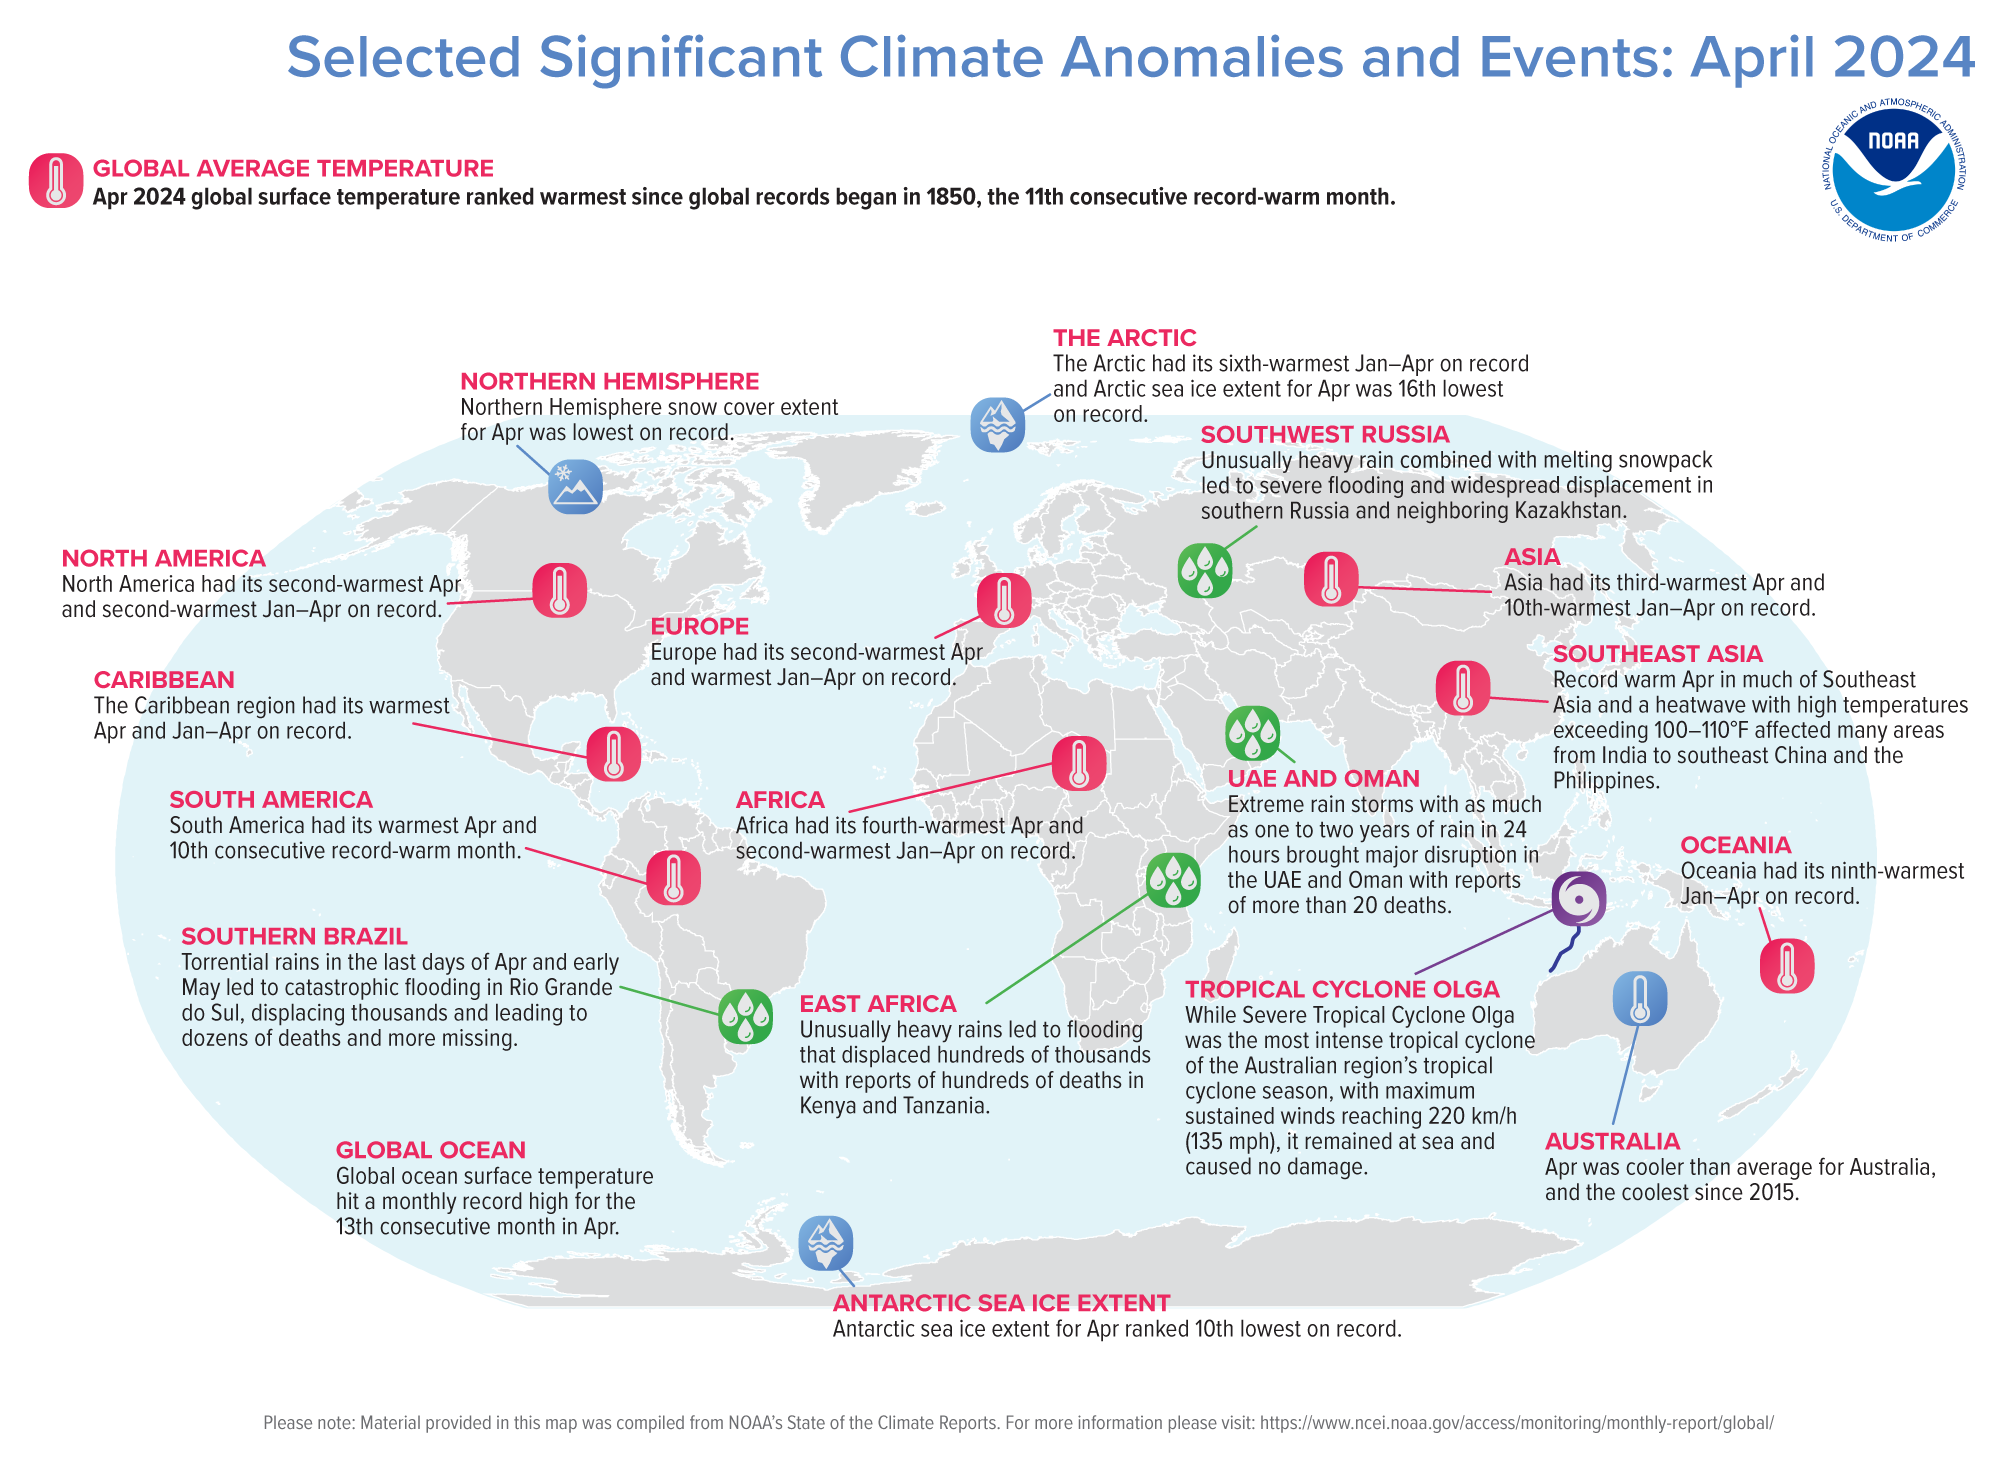 April 2024 Selected Climate Anomalies and Events Map